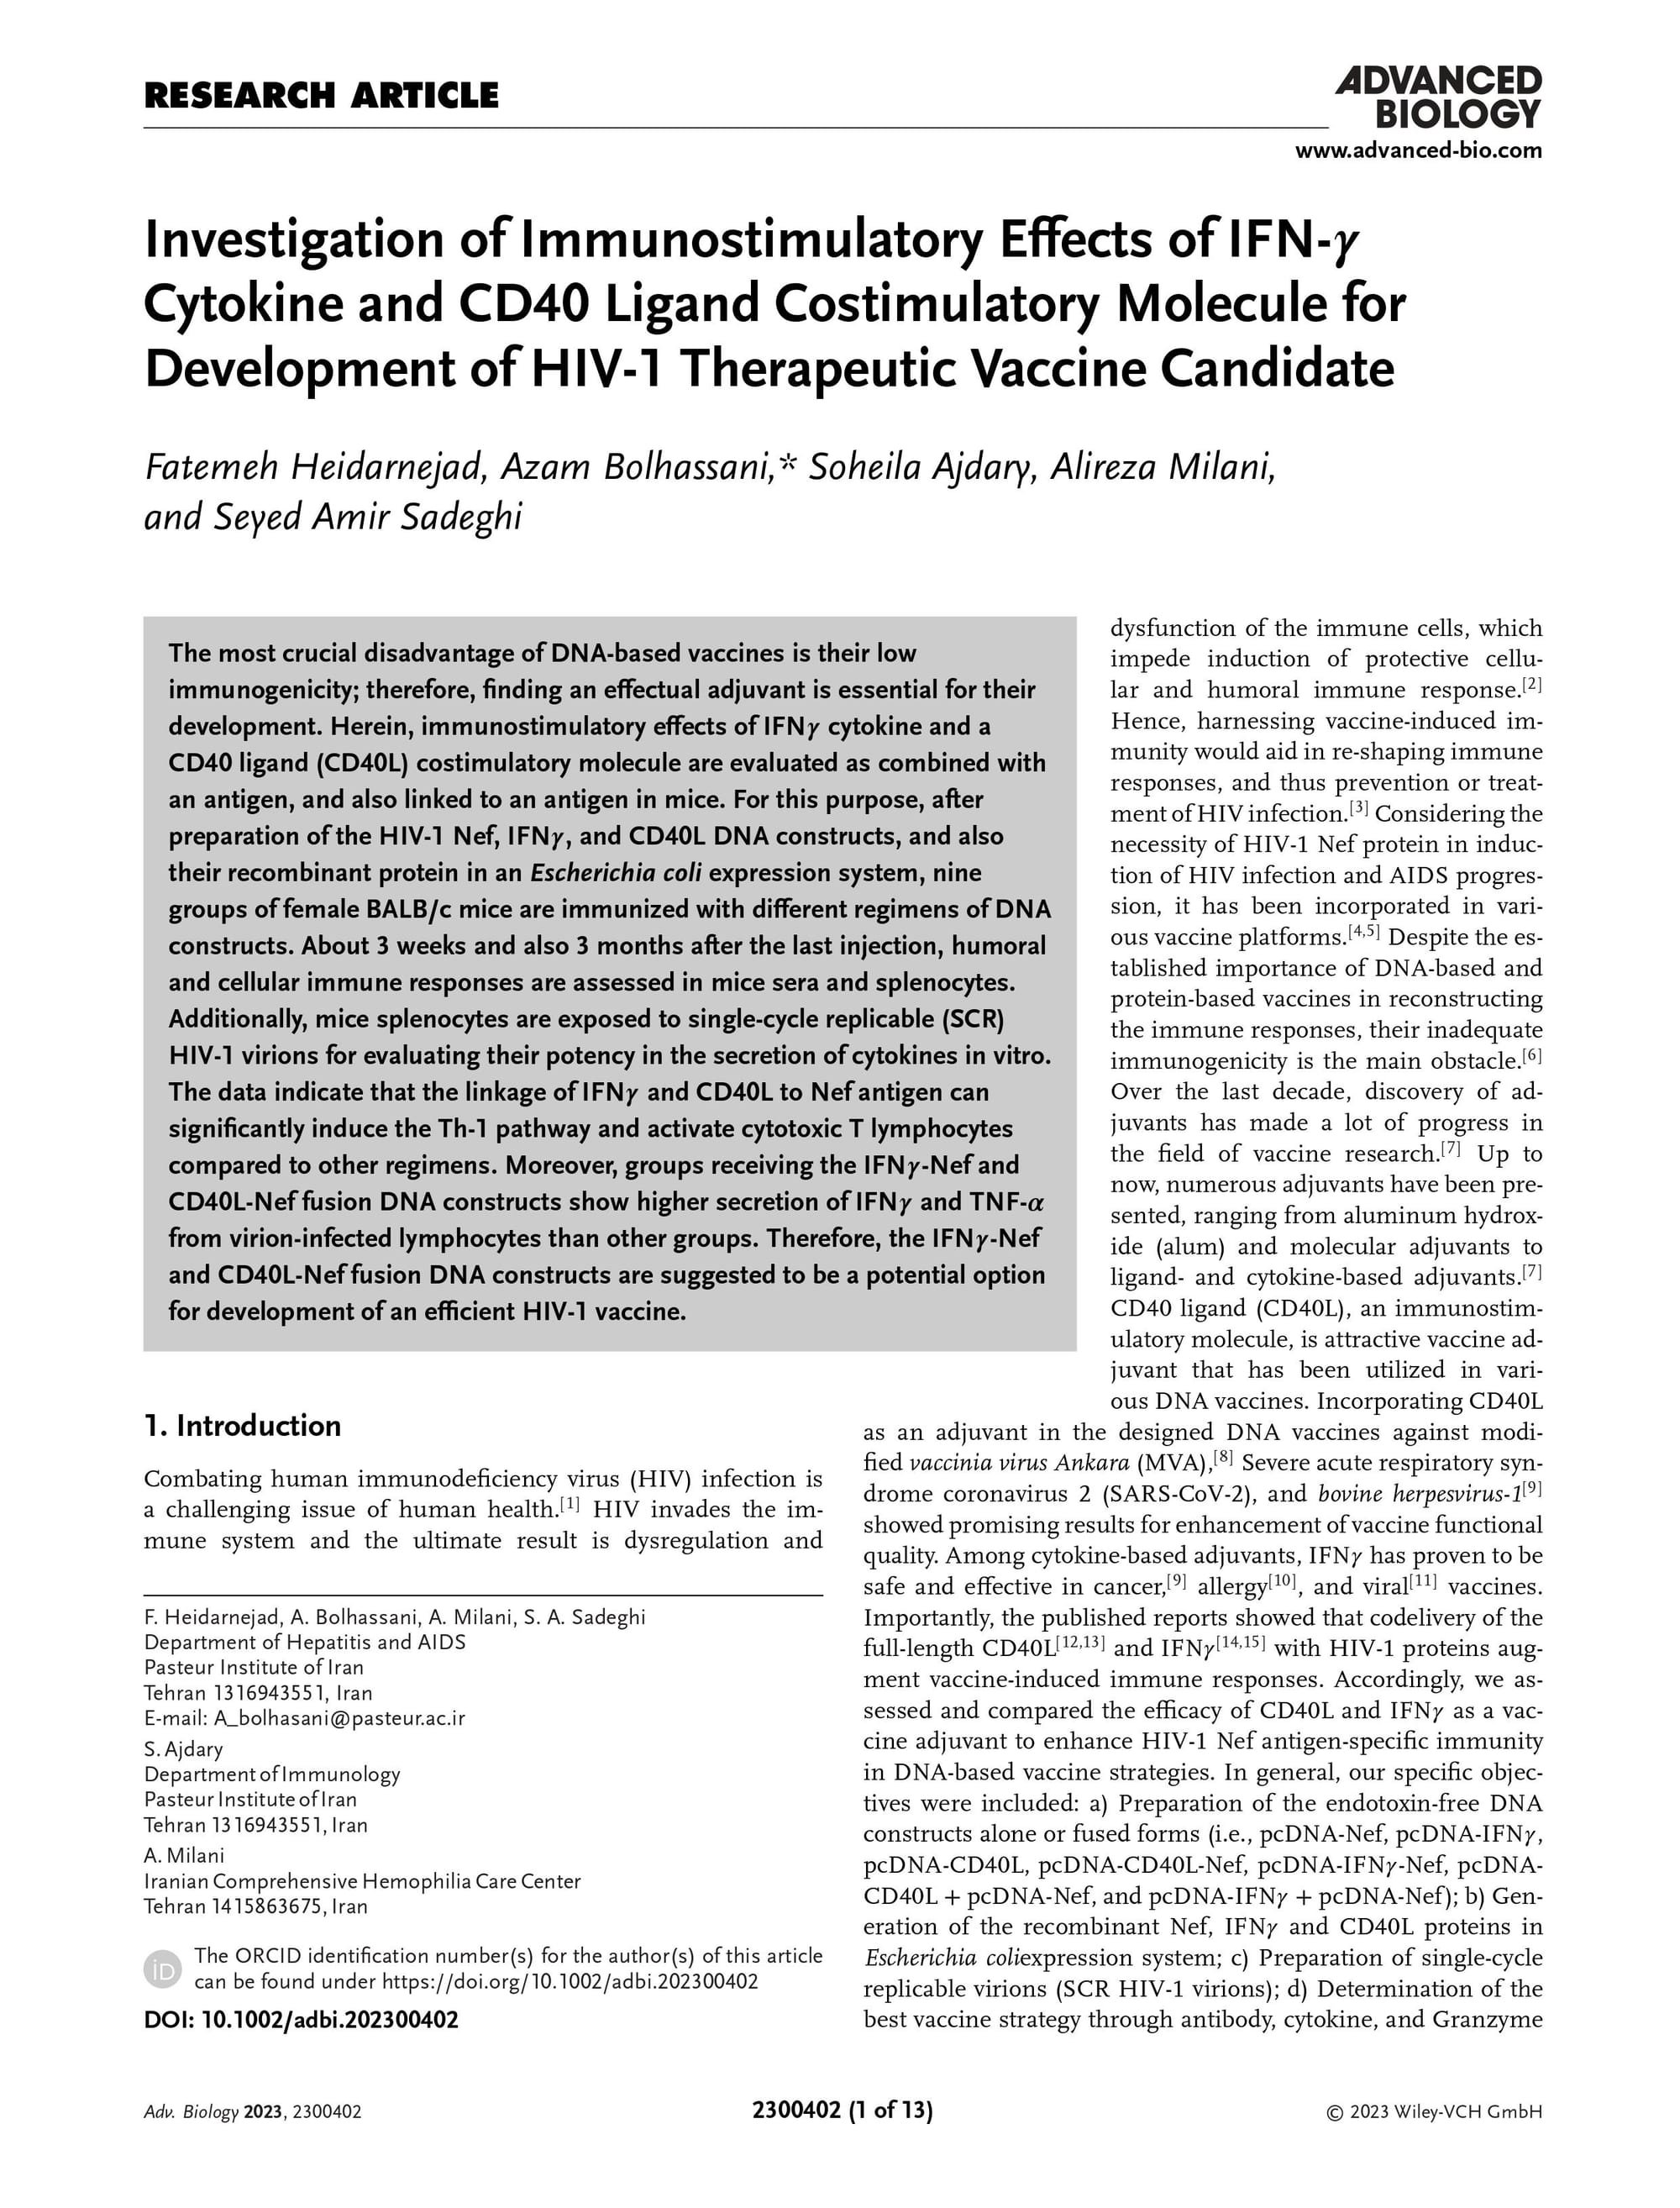 Investigation of immunostimulatory effects of IFN-γ cytokine and CD40 Ligand co-stimulatory molecule for development of HIV-1 therapeutic vaccine candidate.